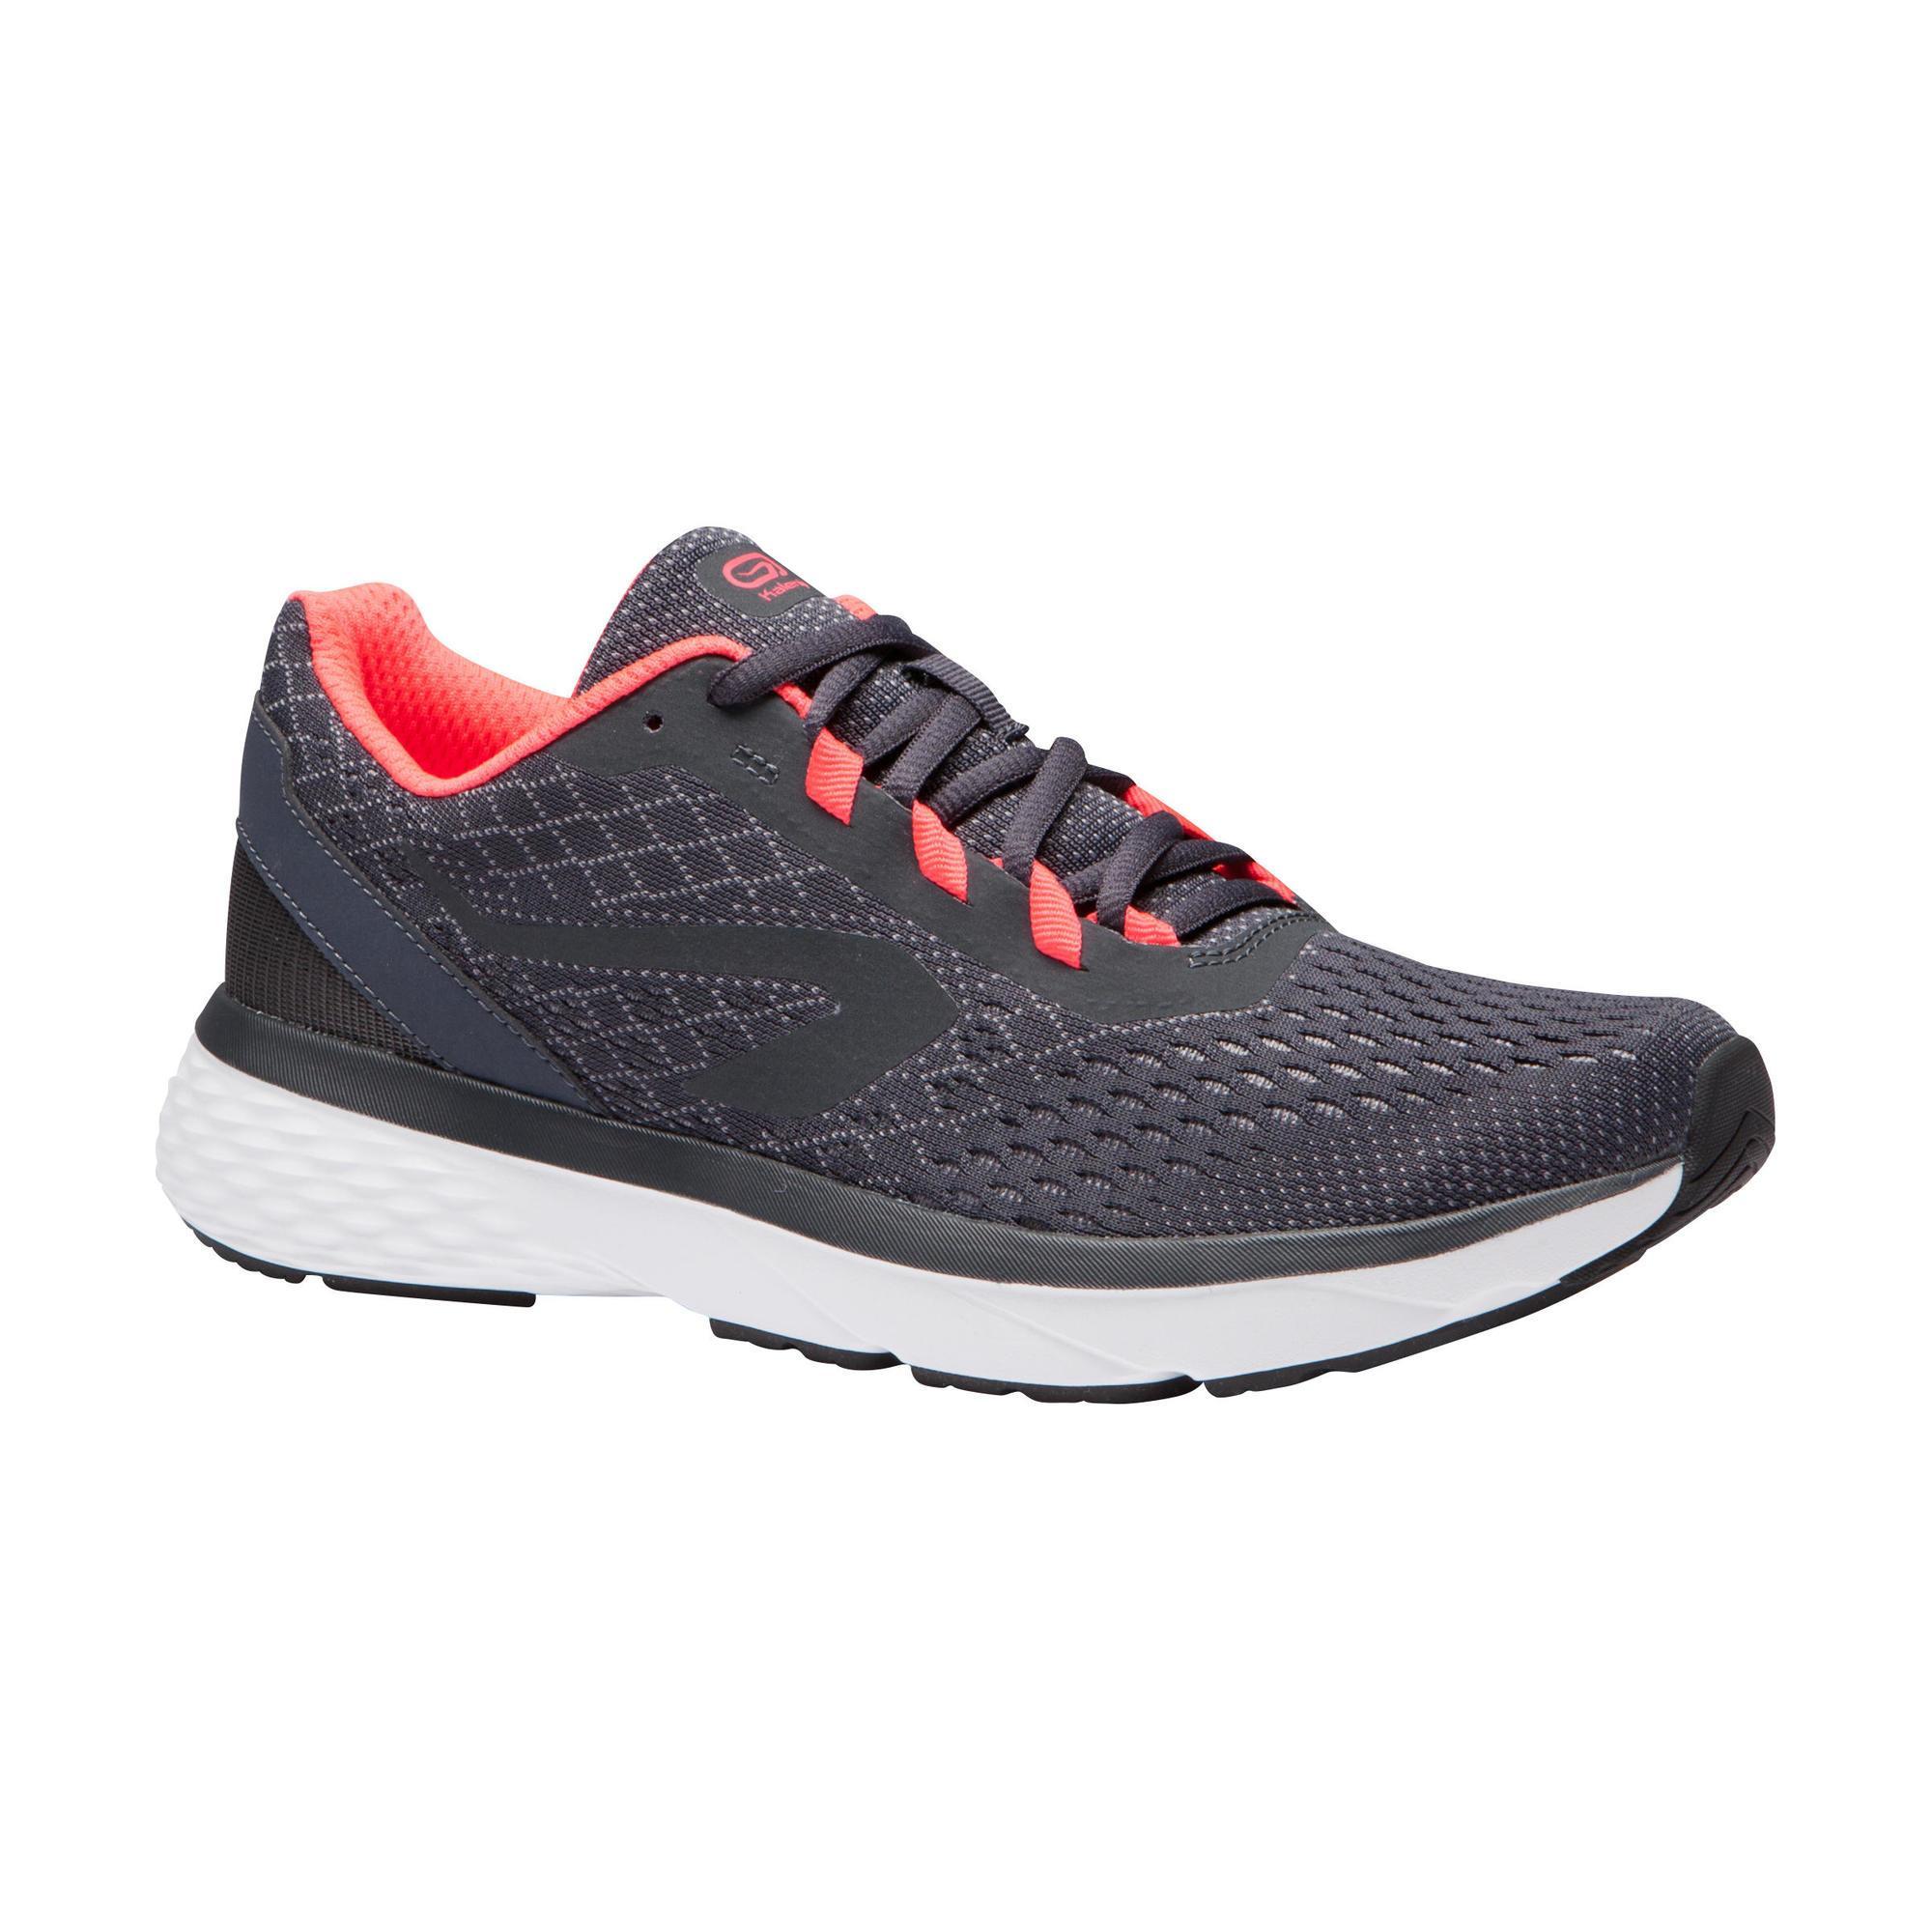 CHAUSSURES JOGGING FEMME RUN SUPPORT CORAIL